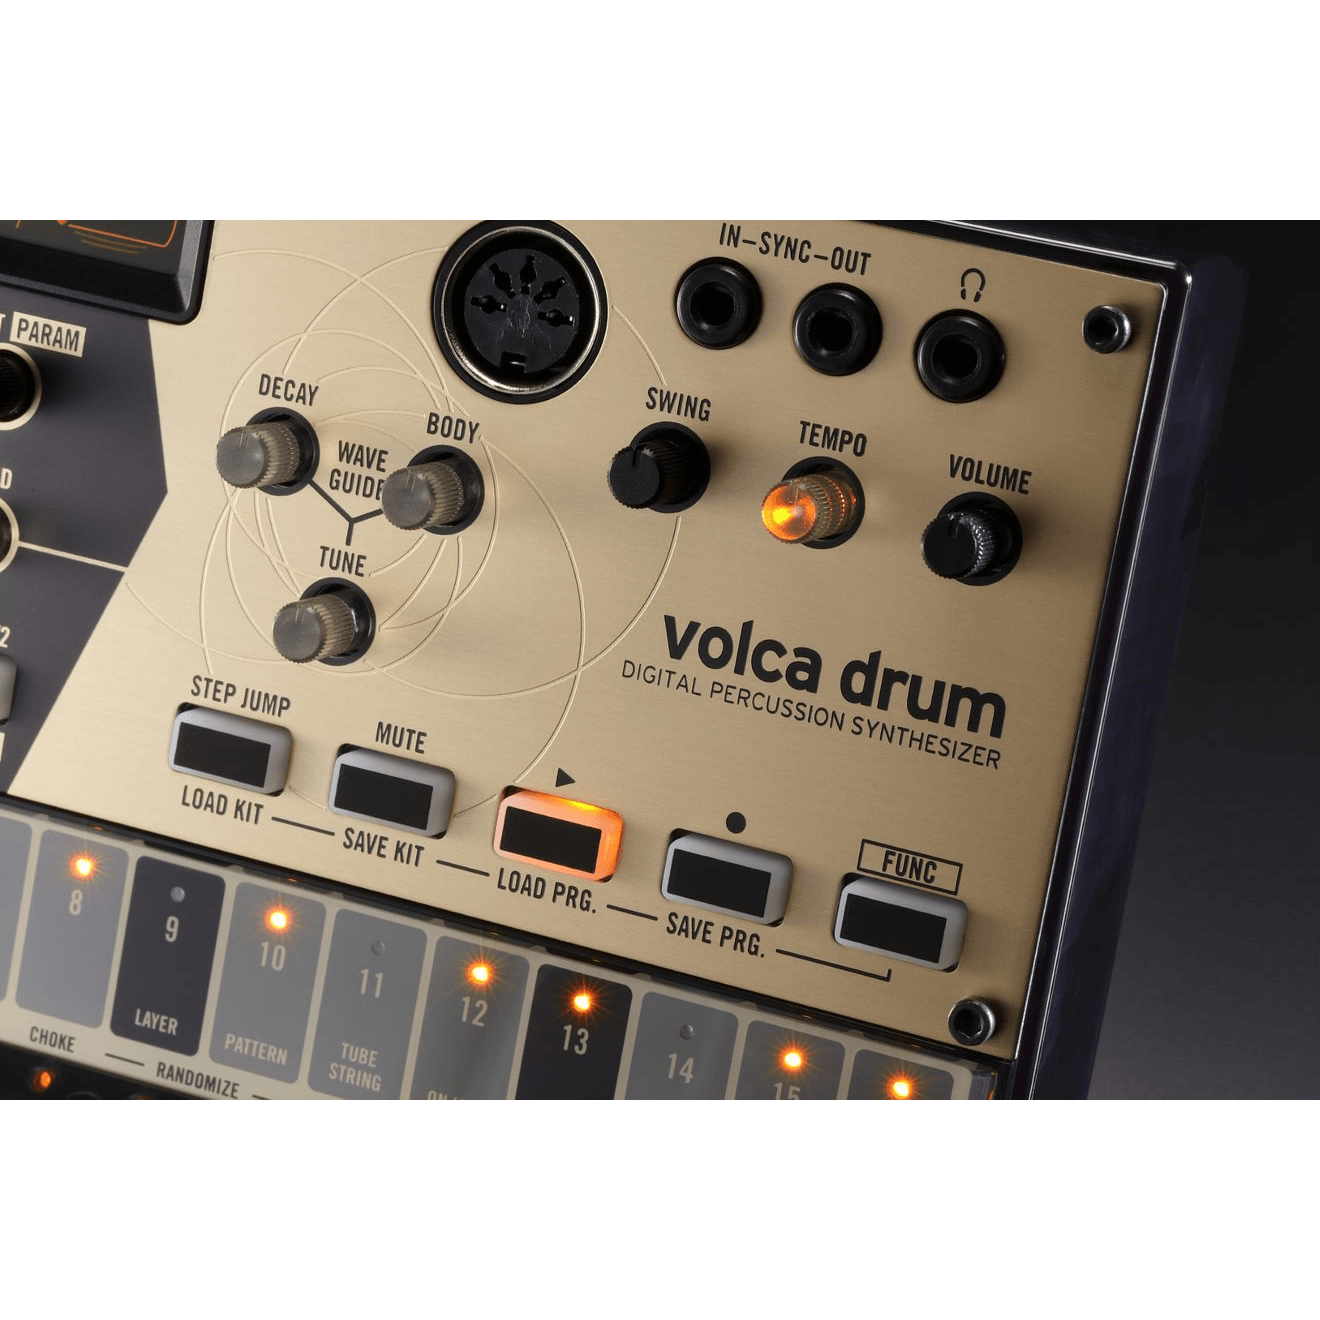 Korg has made a tiny mixer for its Volca gear